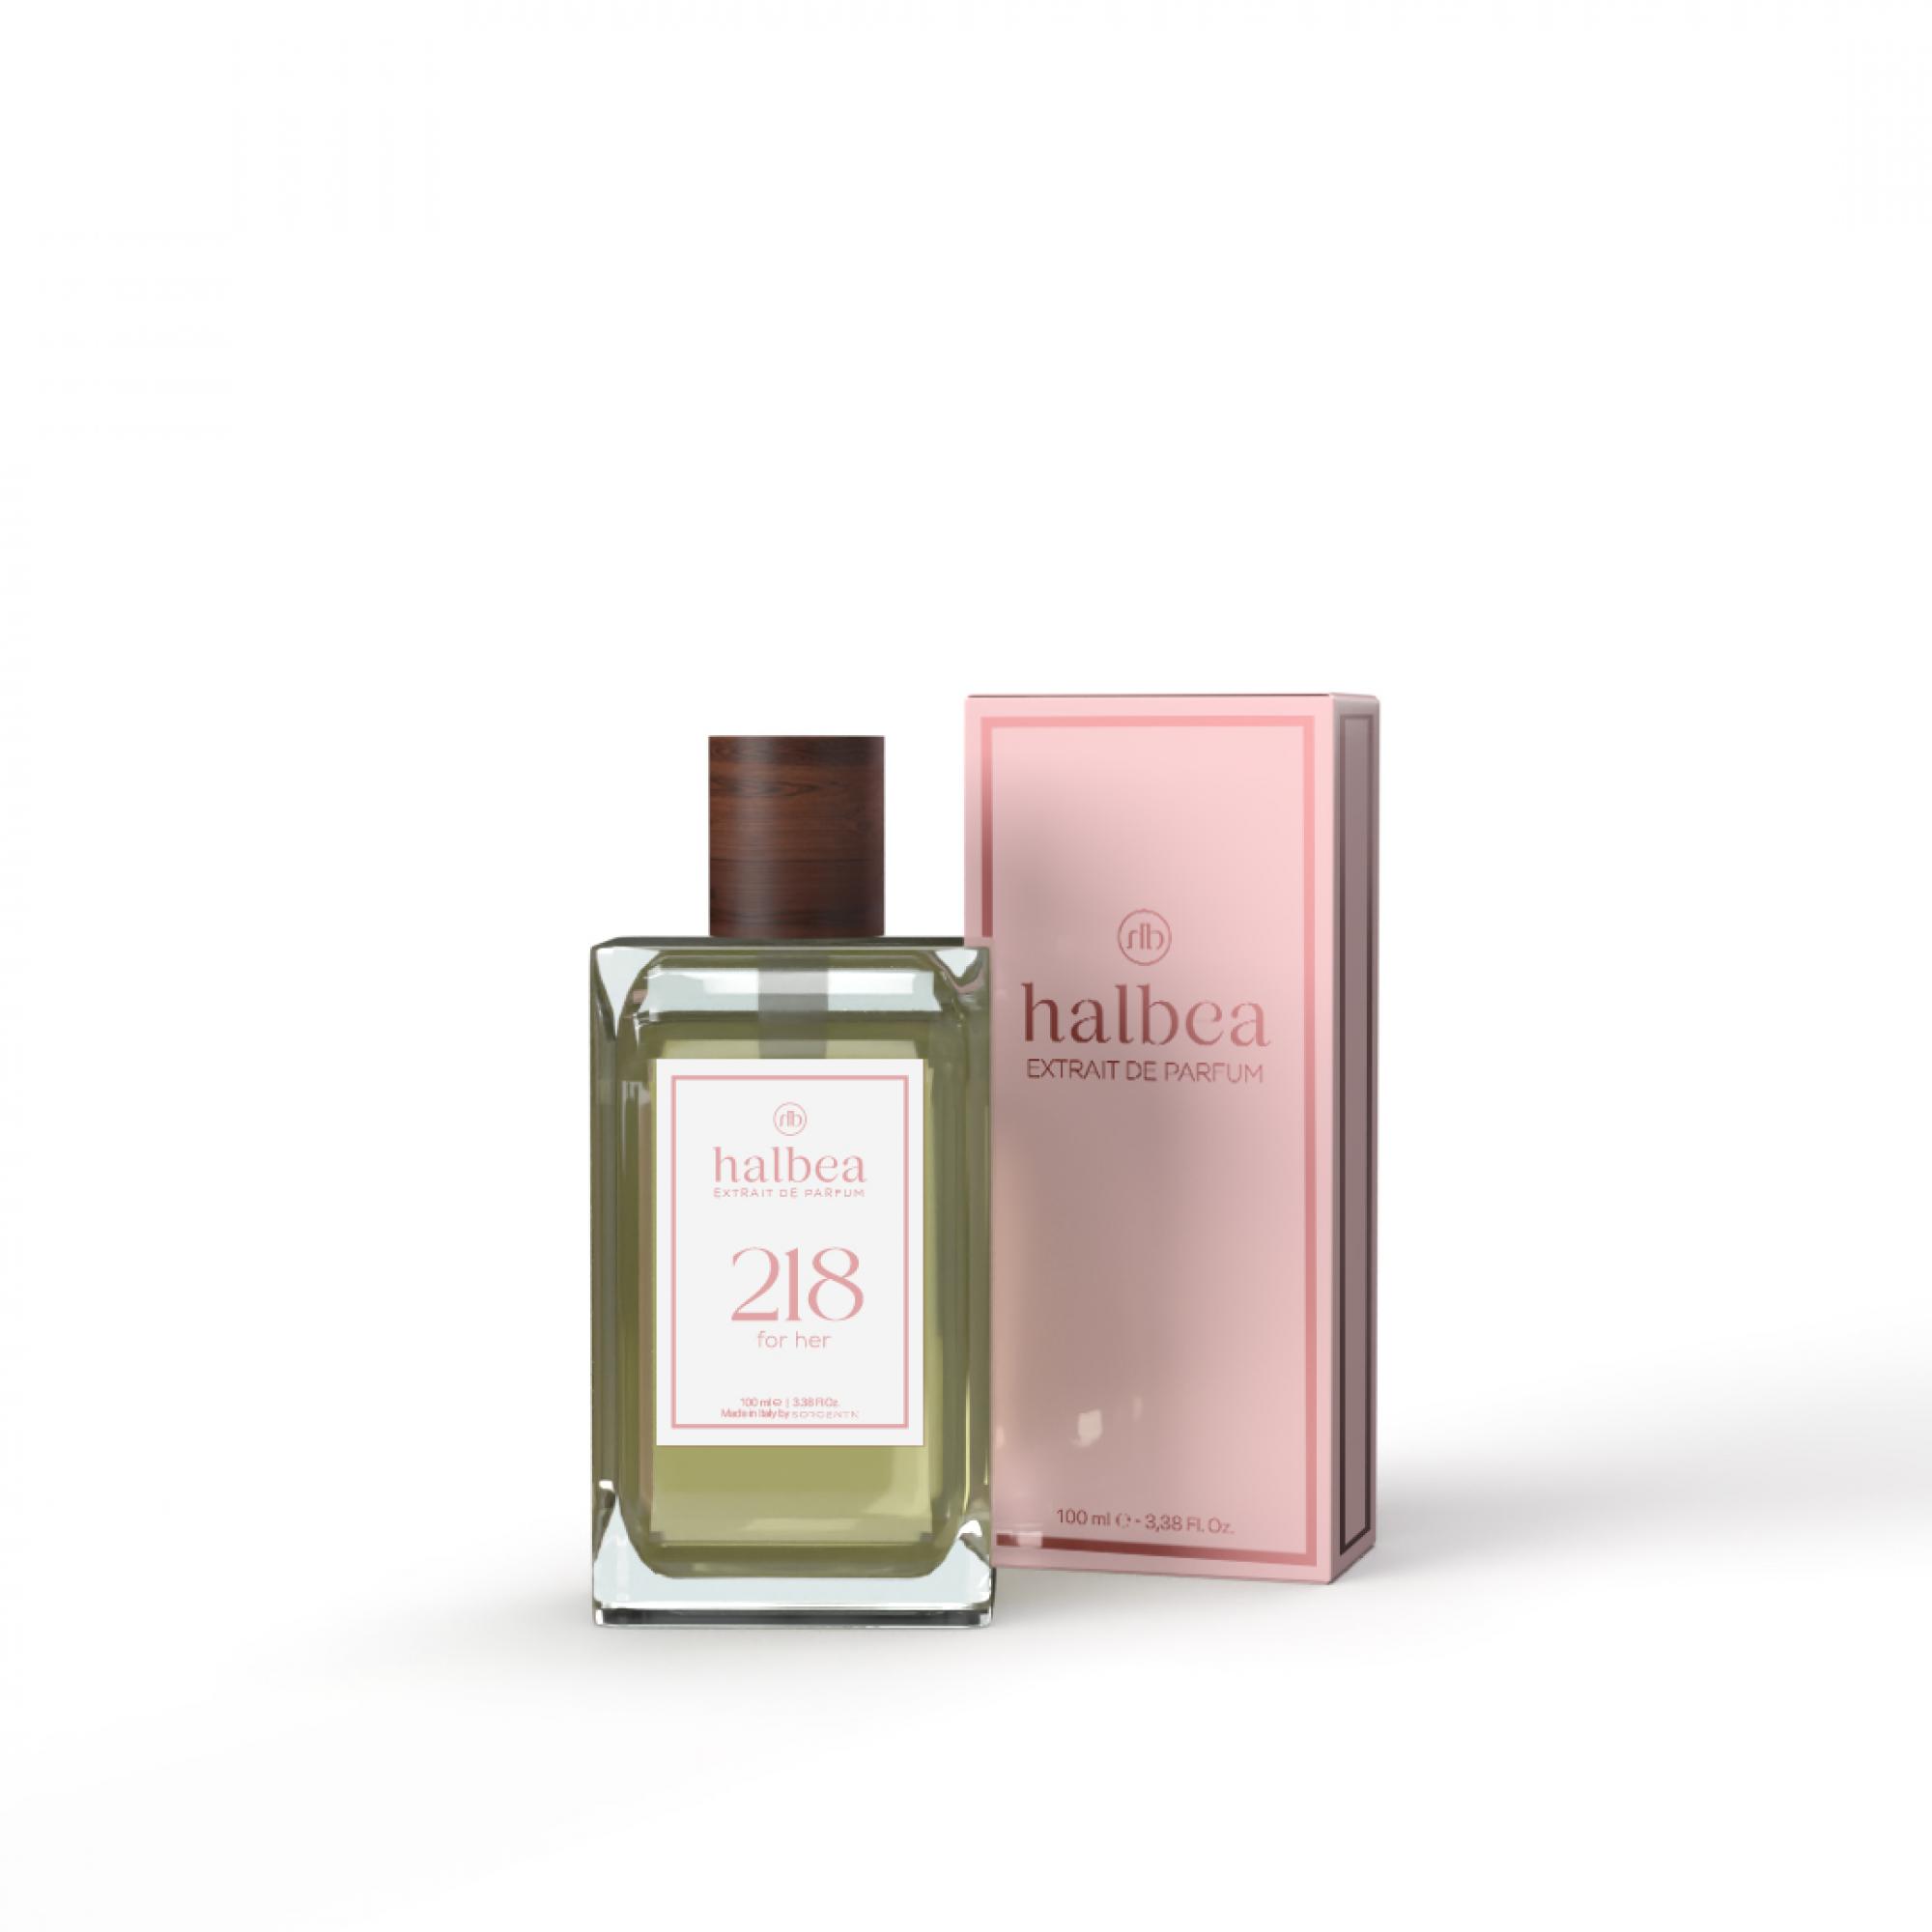 Halbea Parfum Nr. 218 insp. by The One D and G 100ml